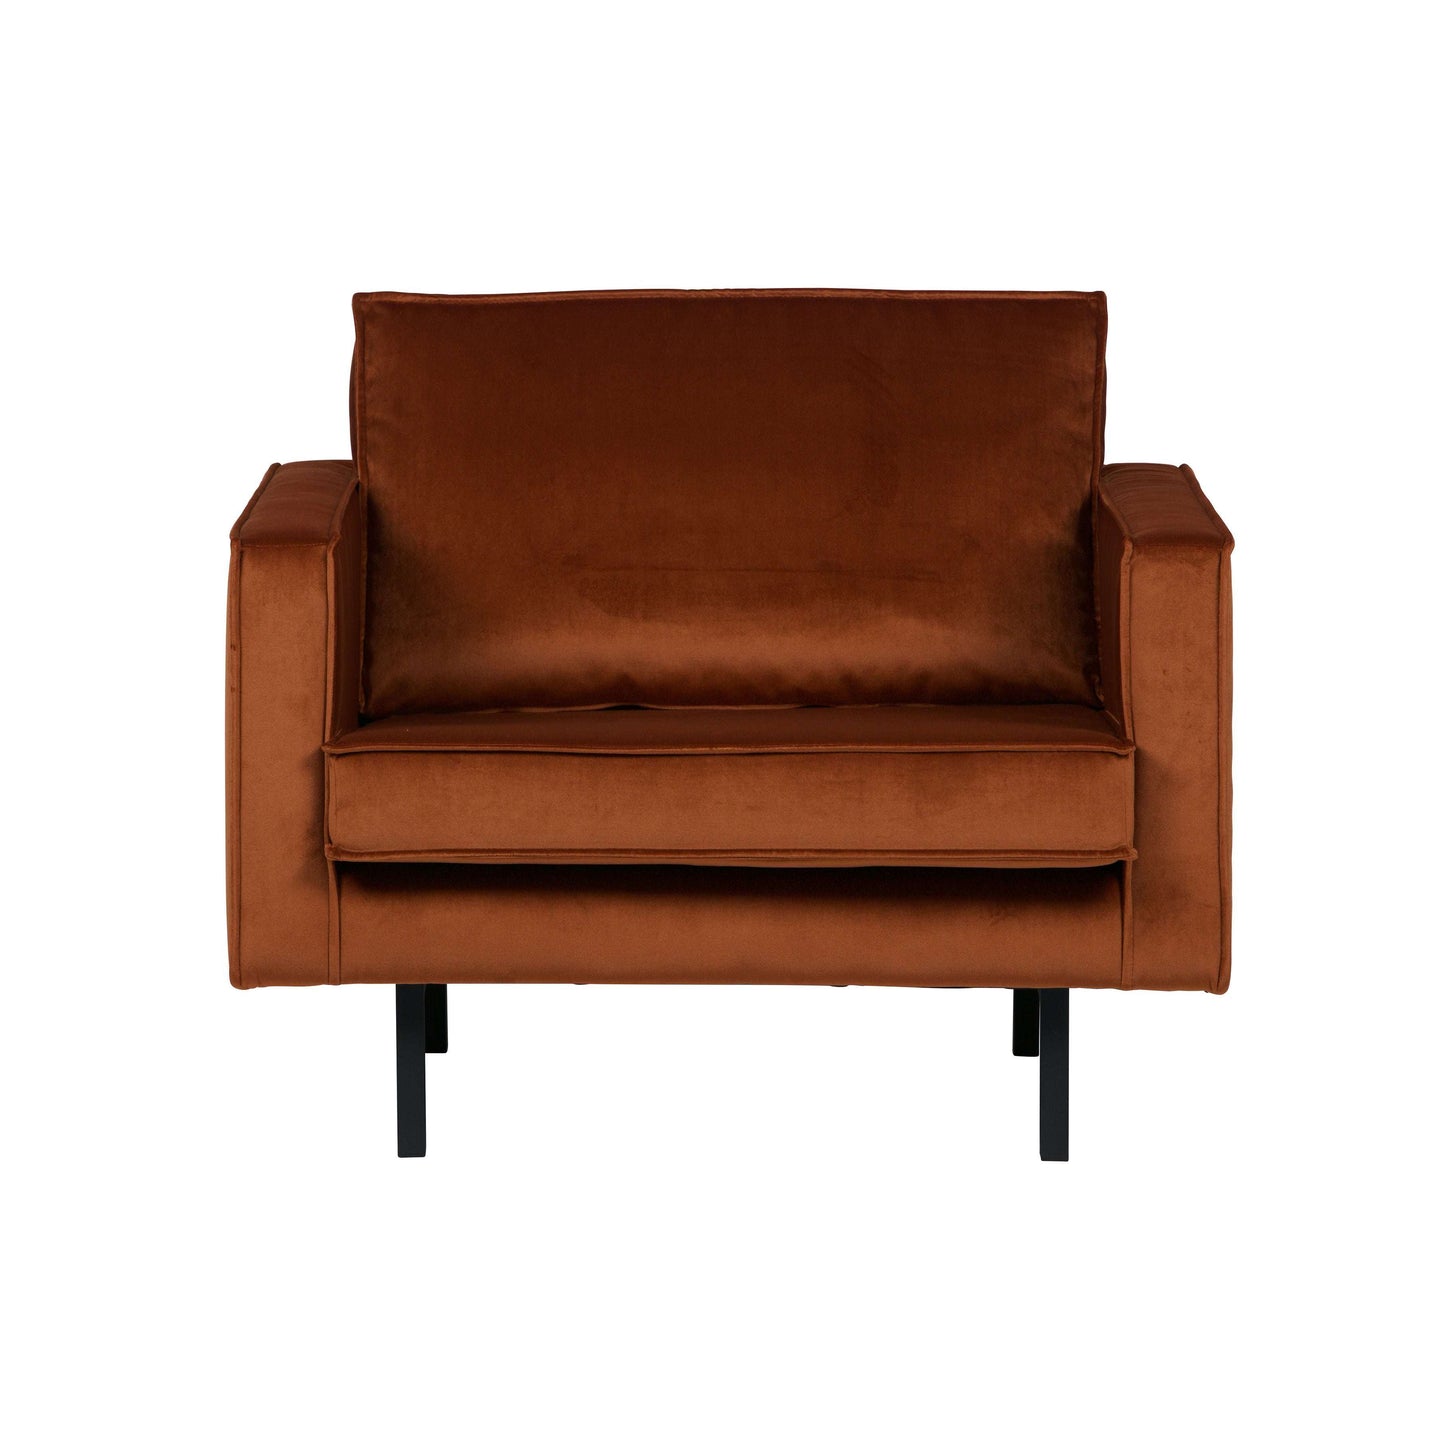 BePureHome Rodeo fauteuil roest